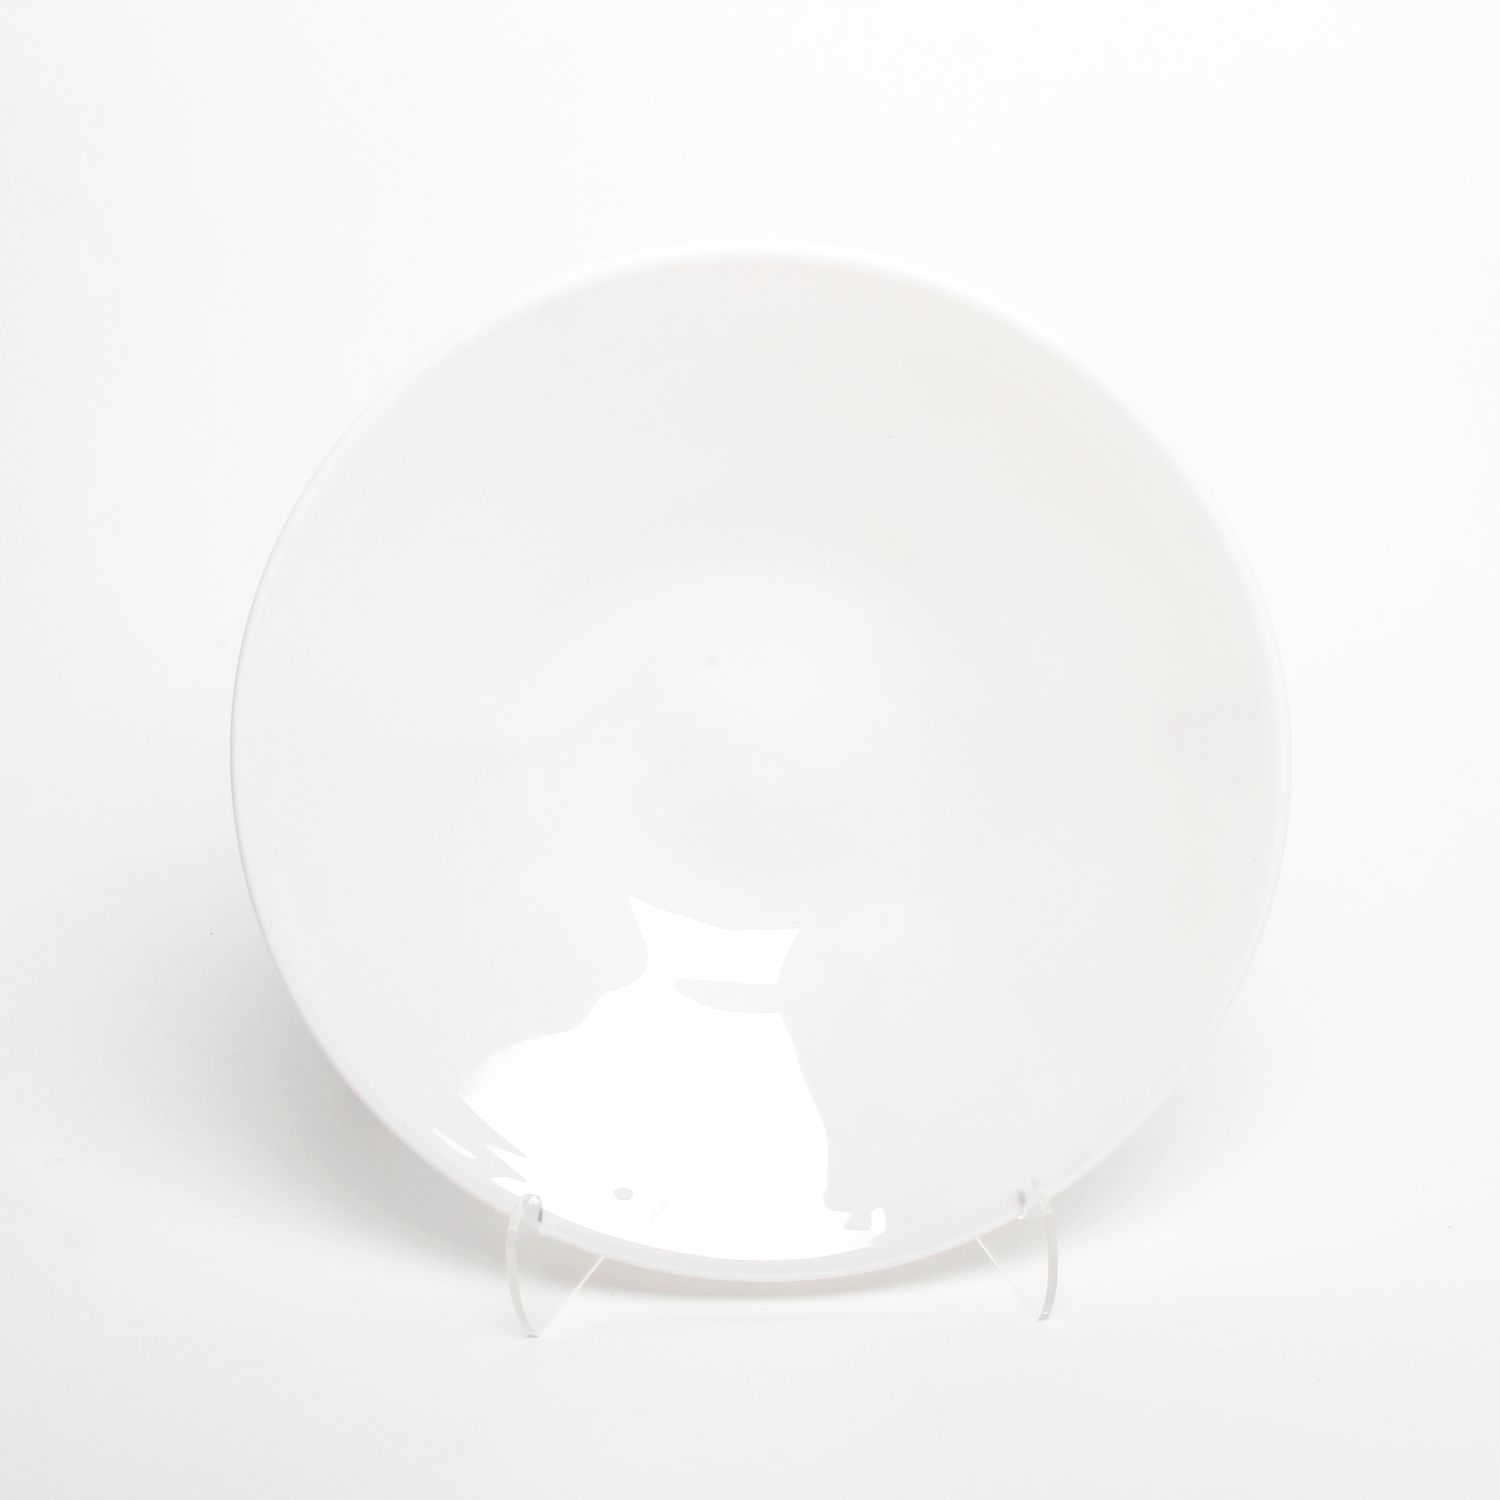 Gordon Boyd: Crosshatch Bowl in White Product Image 1 of 2